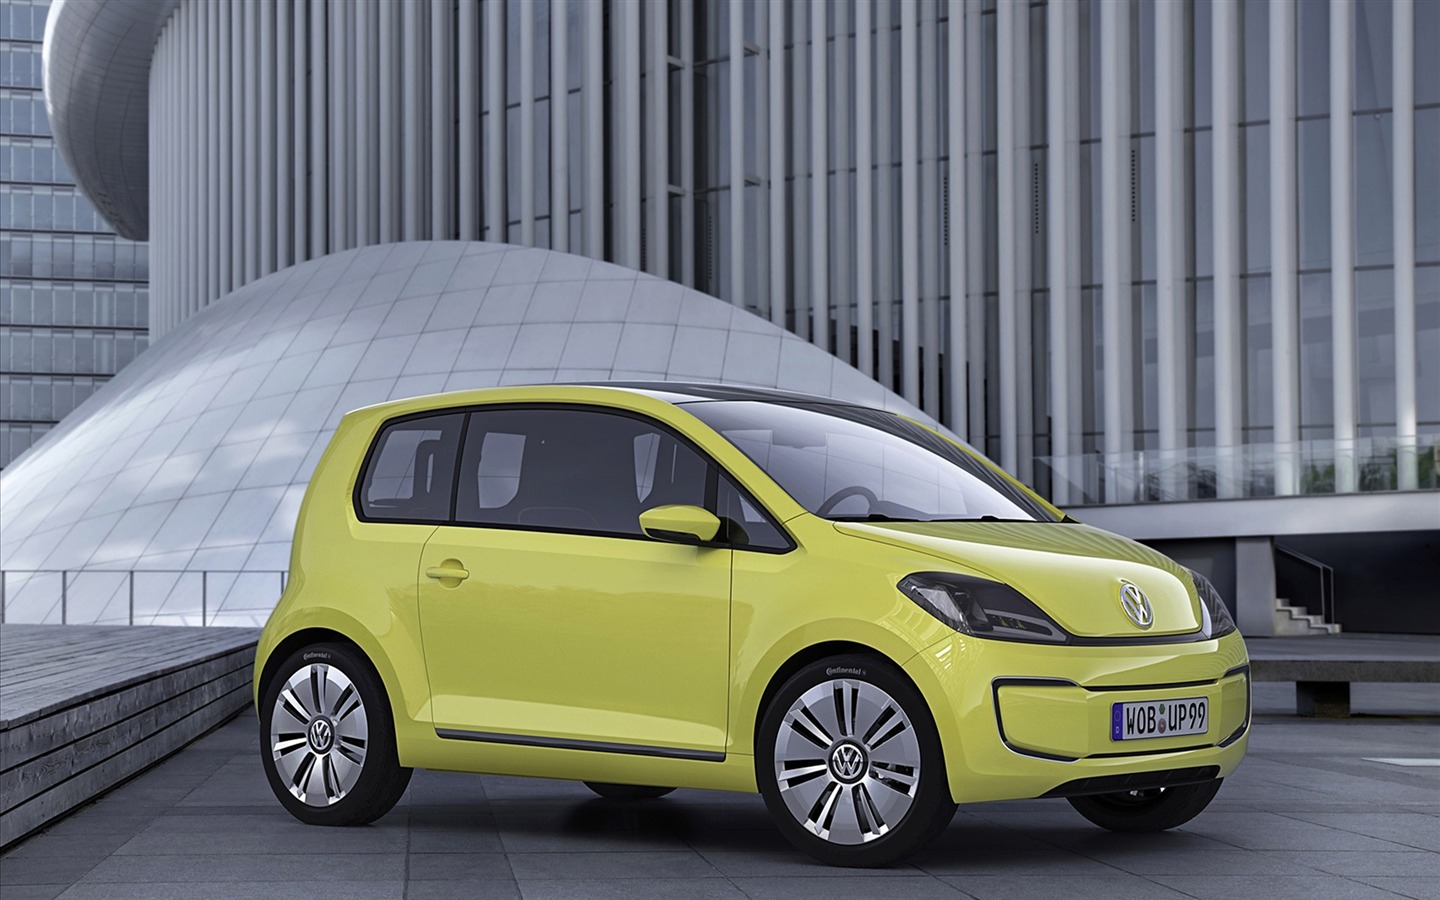 Volkswagen Concept Car tapety (2) #15 - 1440x900